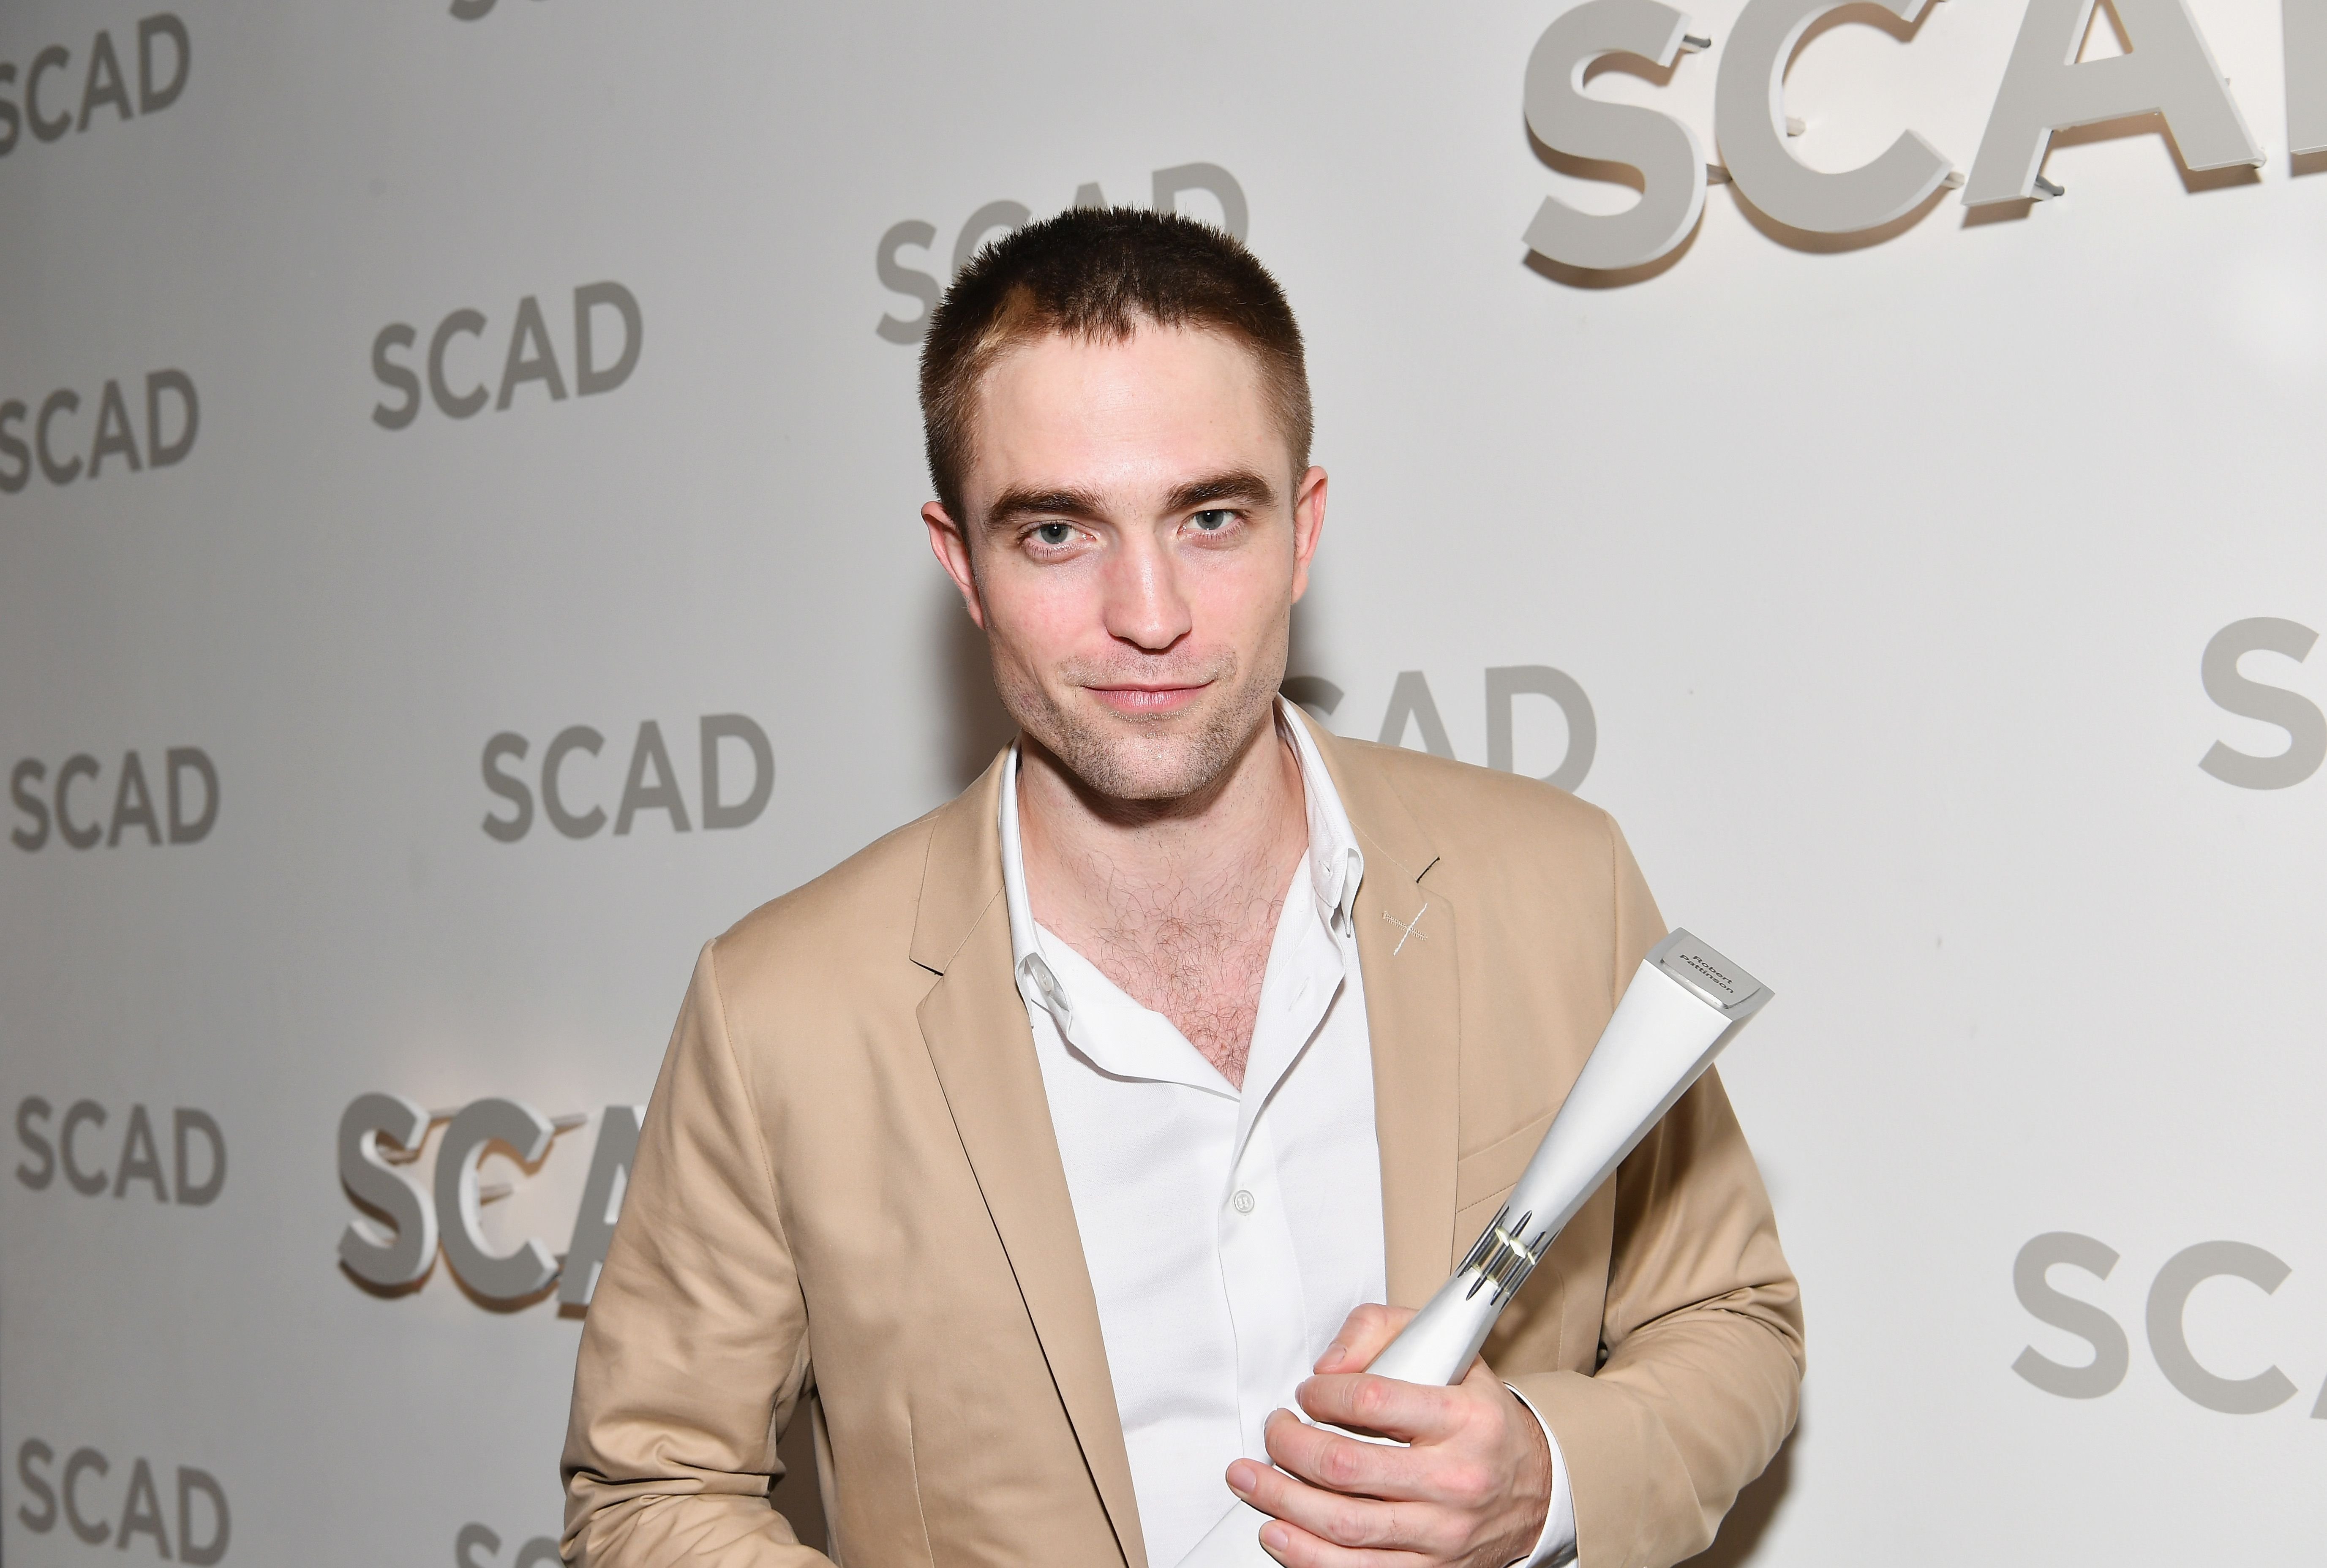 Robert Pattinson at the Trustees Theater during the 20th Anniversary of the SCAD Savannah Film Festival on November 3, 2017 in Savannah, Georgia. | Source: Getty Images